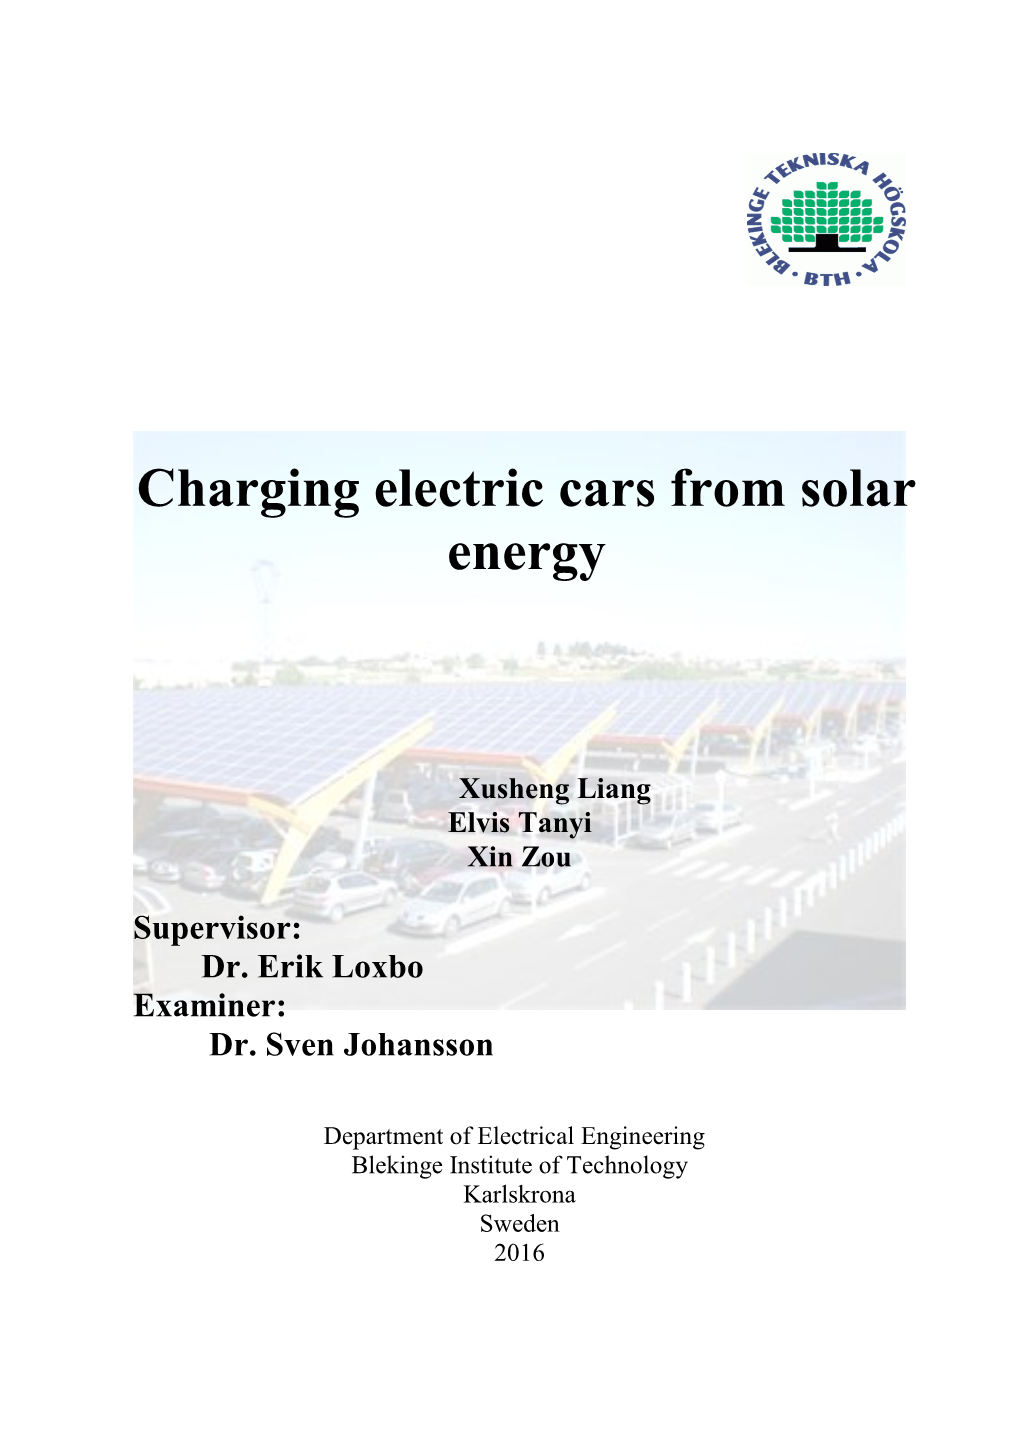 Charging Electric Cars from Solar Energy